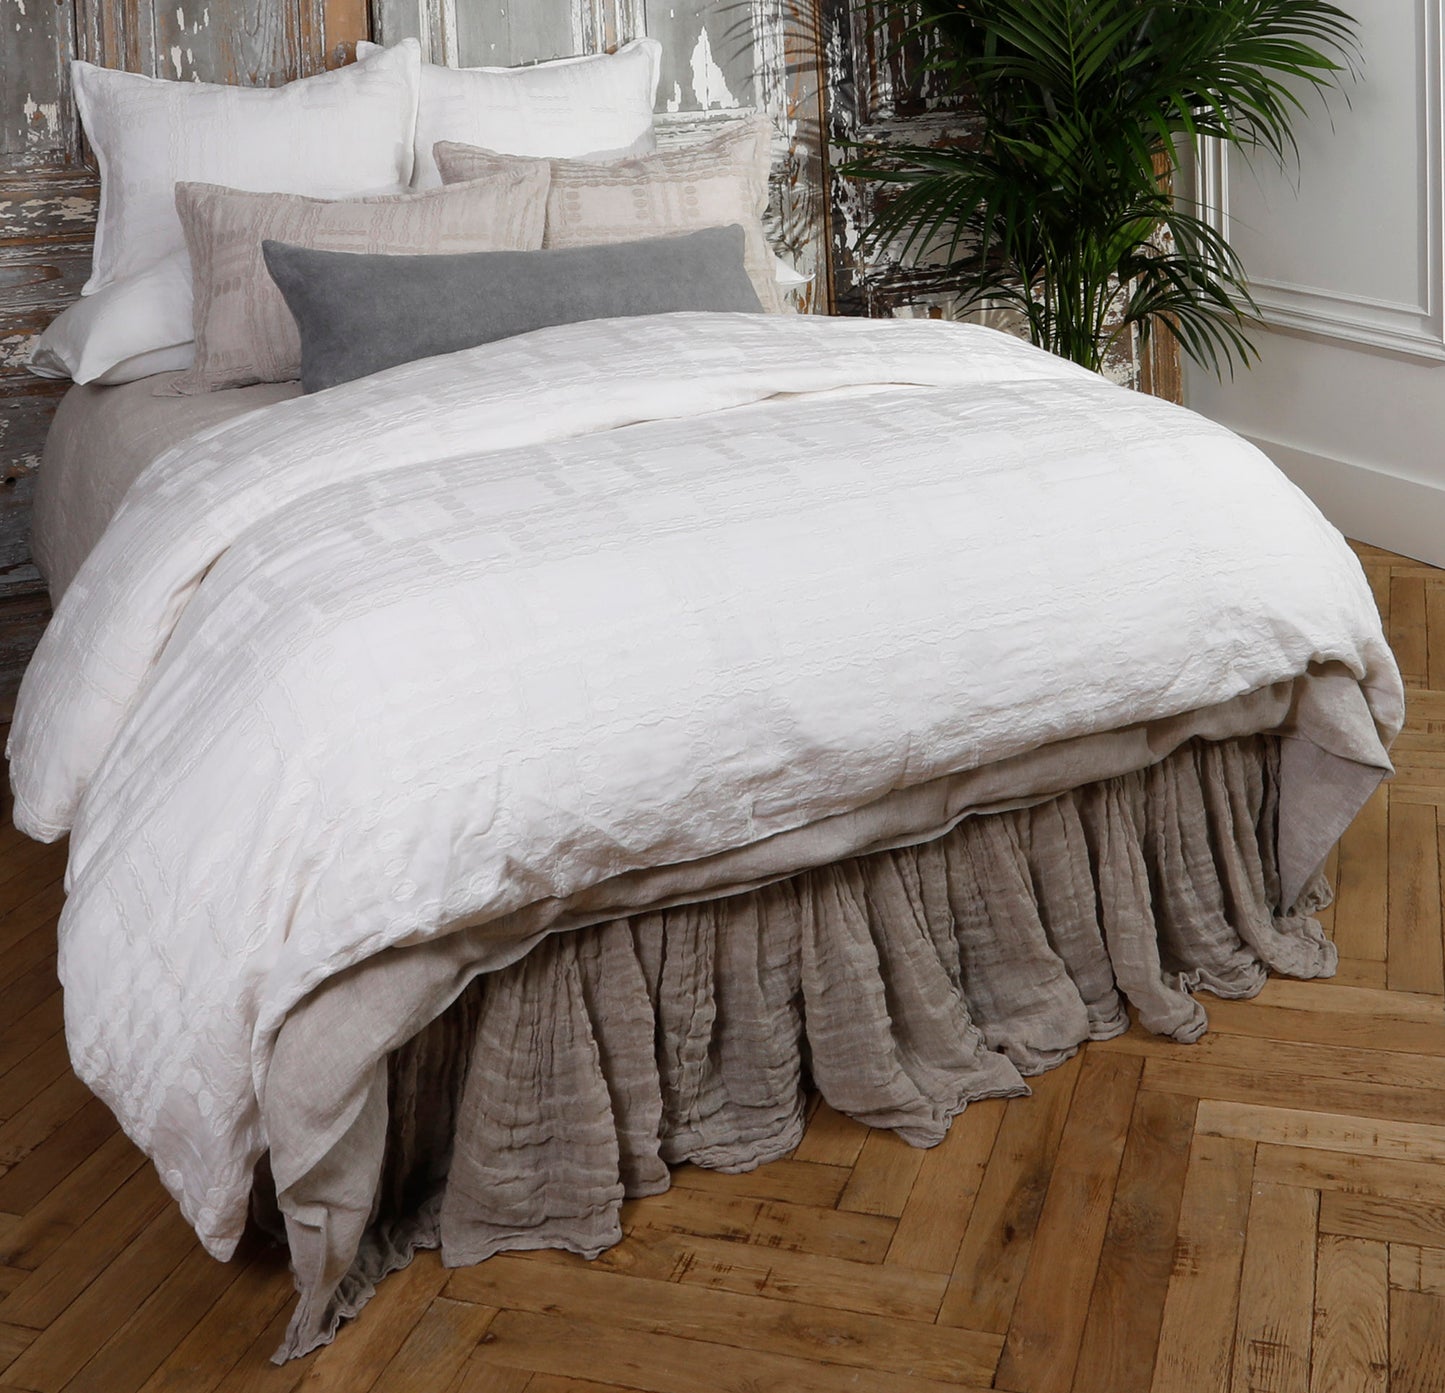 Buy Linen ruffle Sea Isle Bed Skirt for bedroom sets king size